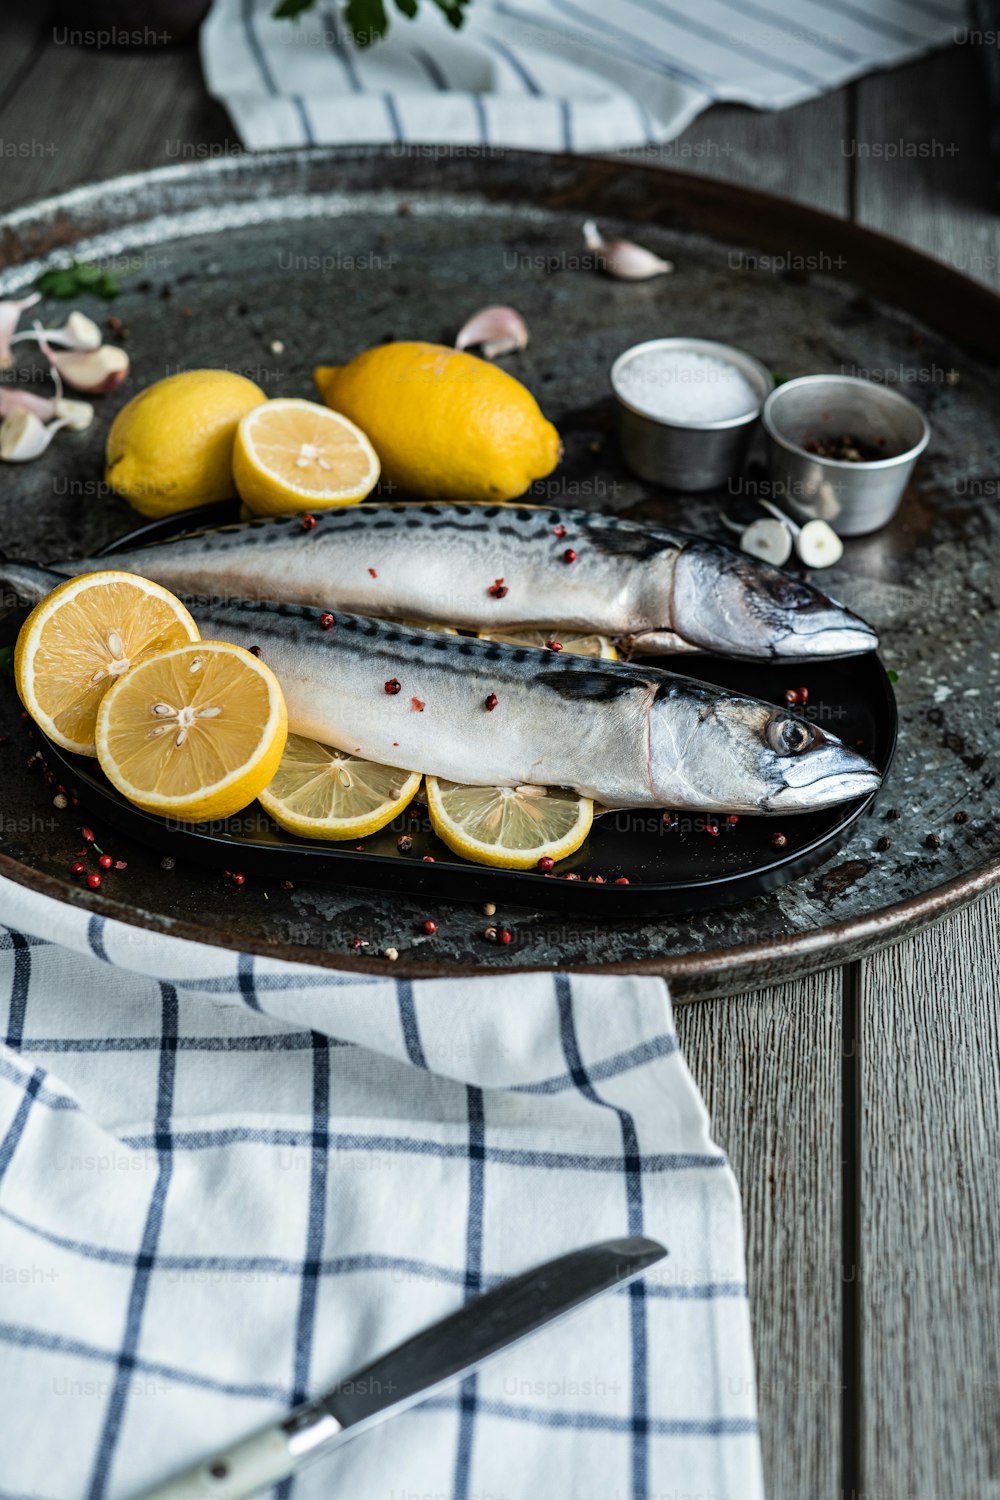 a plate of fish and lemons on a table